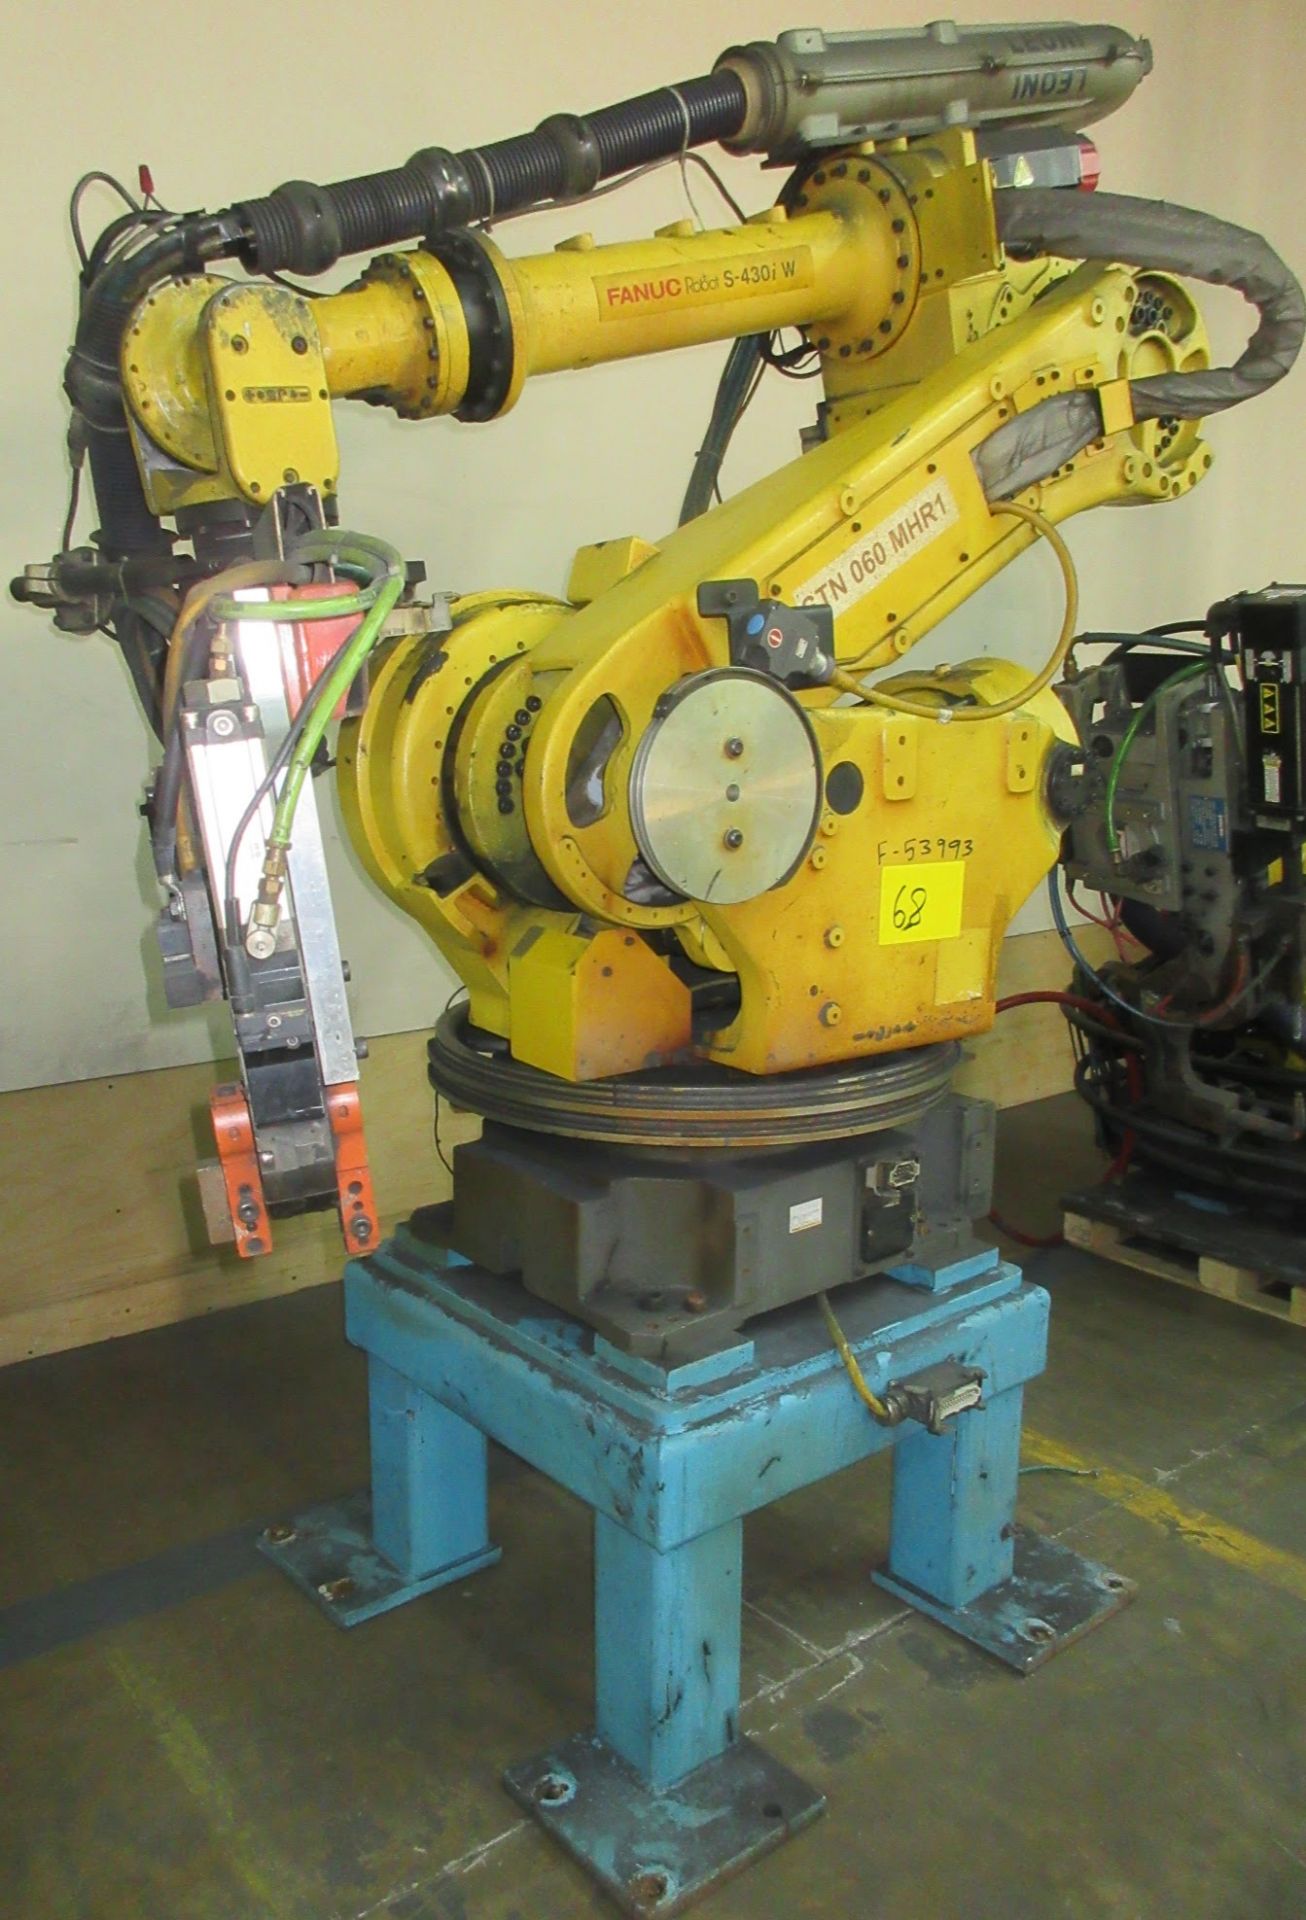 FANUC S-430IW LOADING ROBOT W/ SYSTEM RJ3 ROBOT CONTROLLER, CABLES AND TEACH PENDANT (LOCATED IN